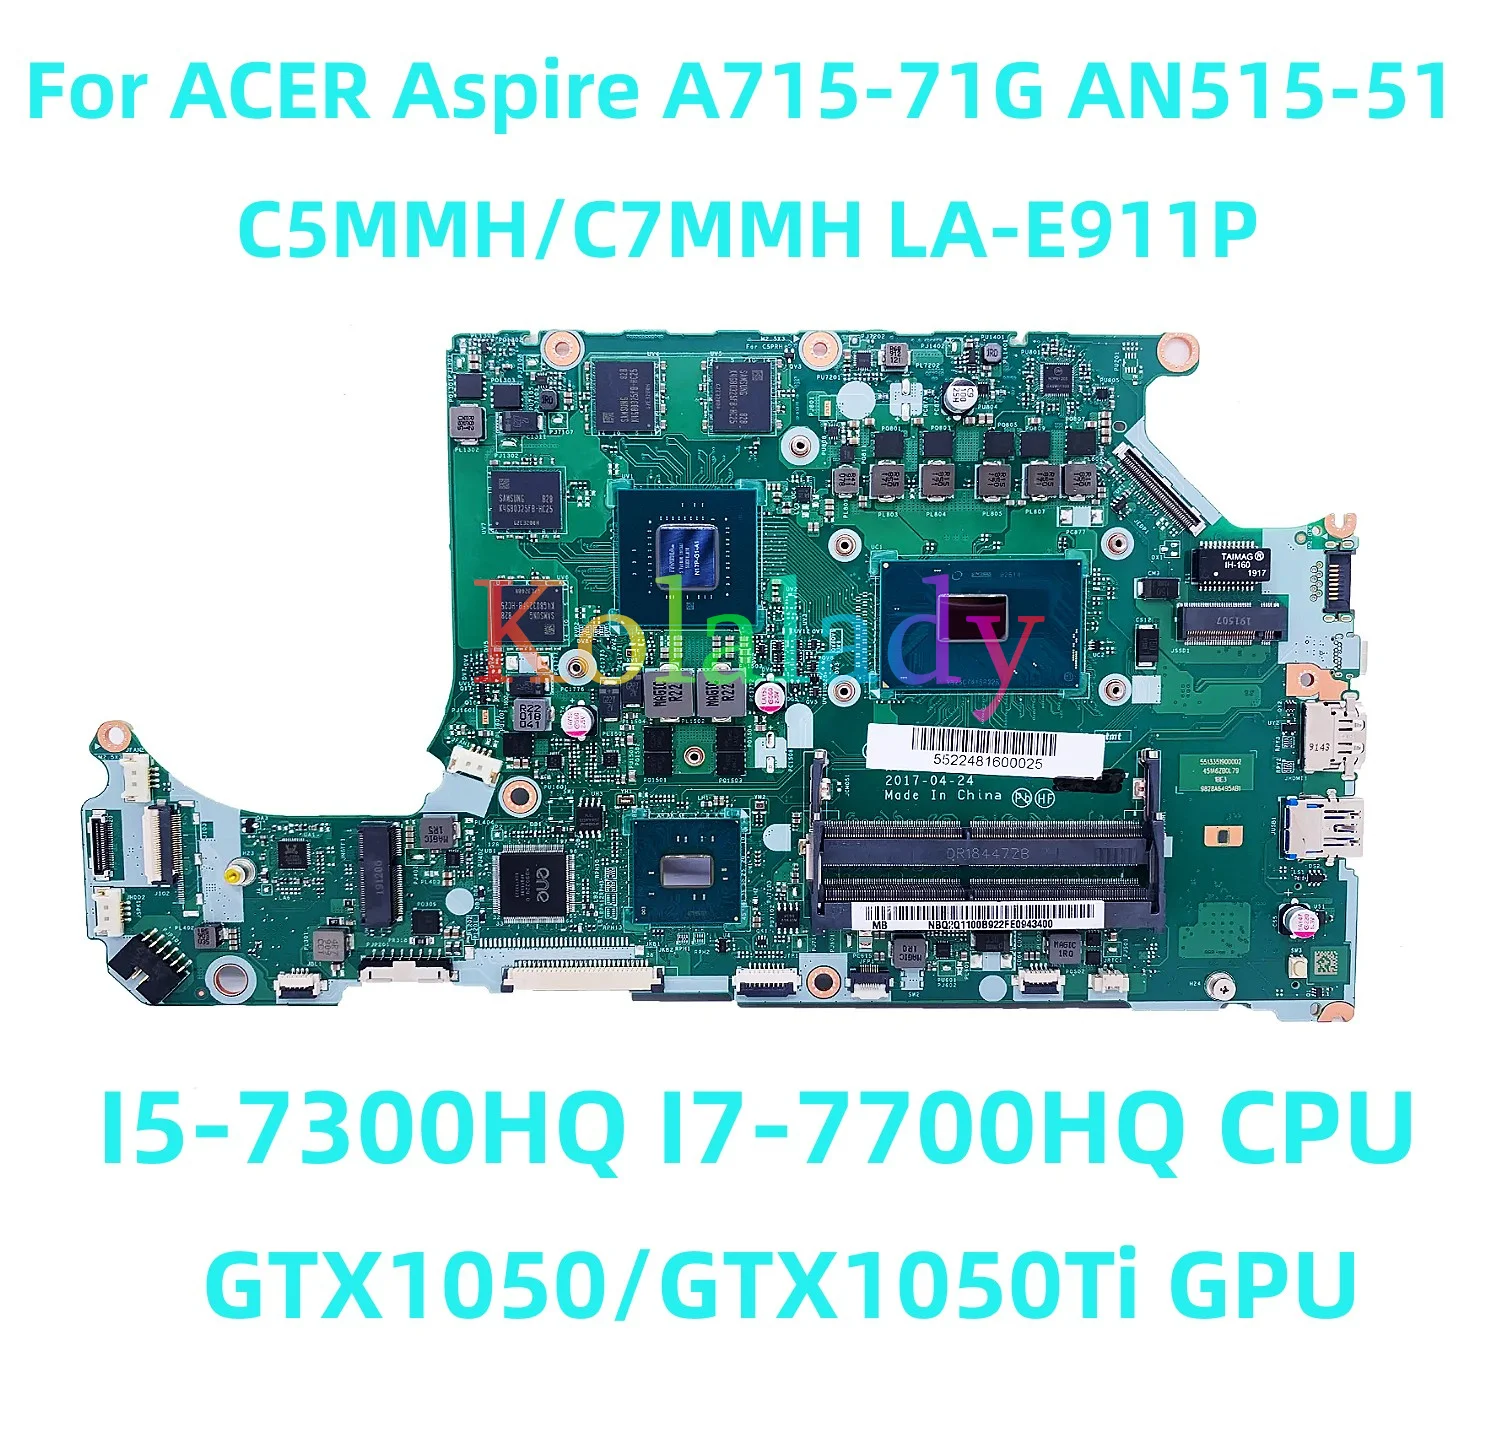 

For ACER Aspire A715-71G AN515-51 Laptop motherboard C5MMH/C7MMH LA-E911P with I5-7300HQ I7-7700HQ CPU GTX1050/GTX1050Ti